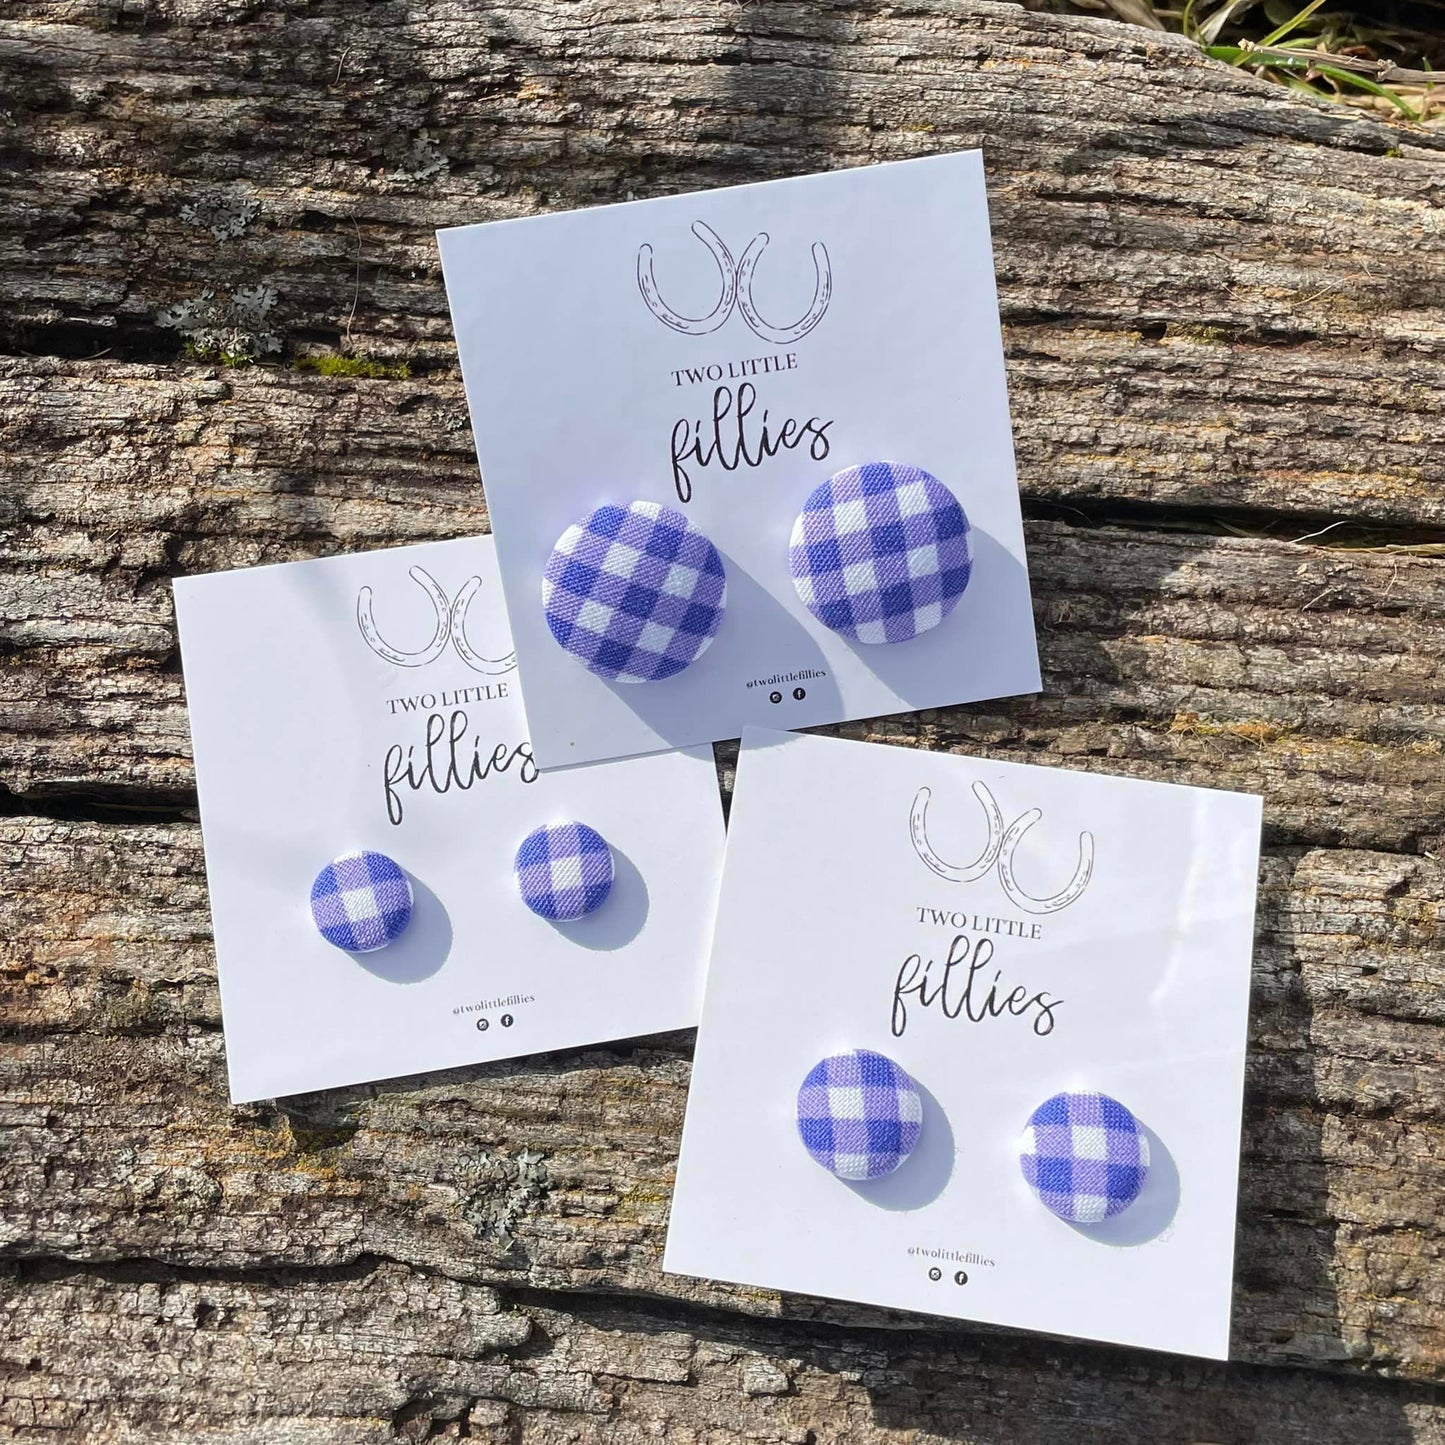 Handcrafted Purple Gingham Fabric Studs